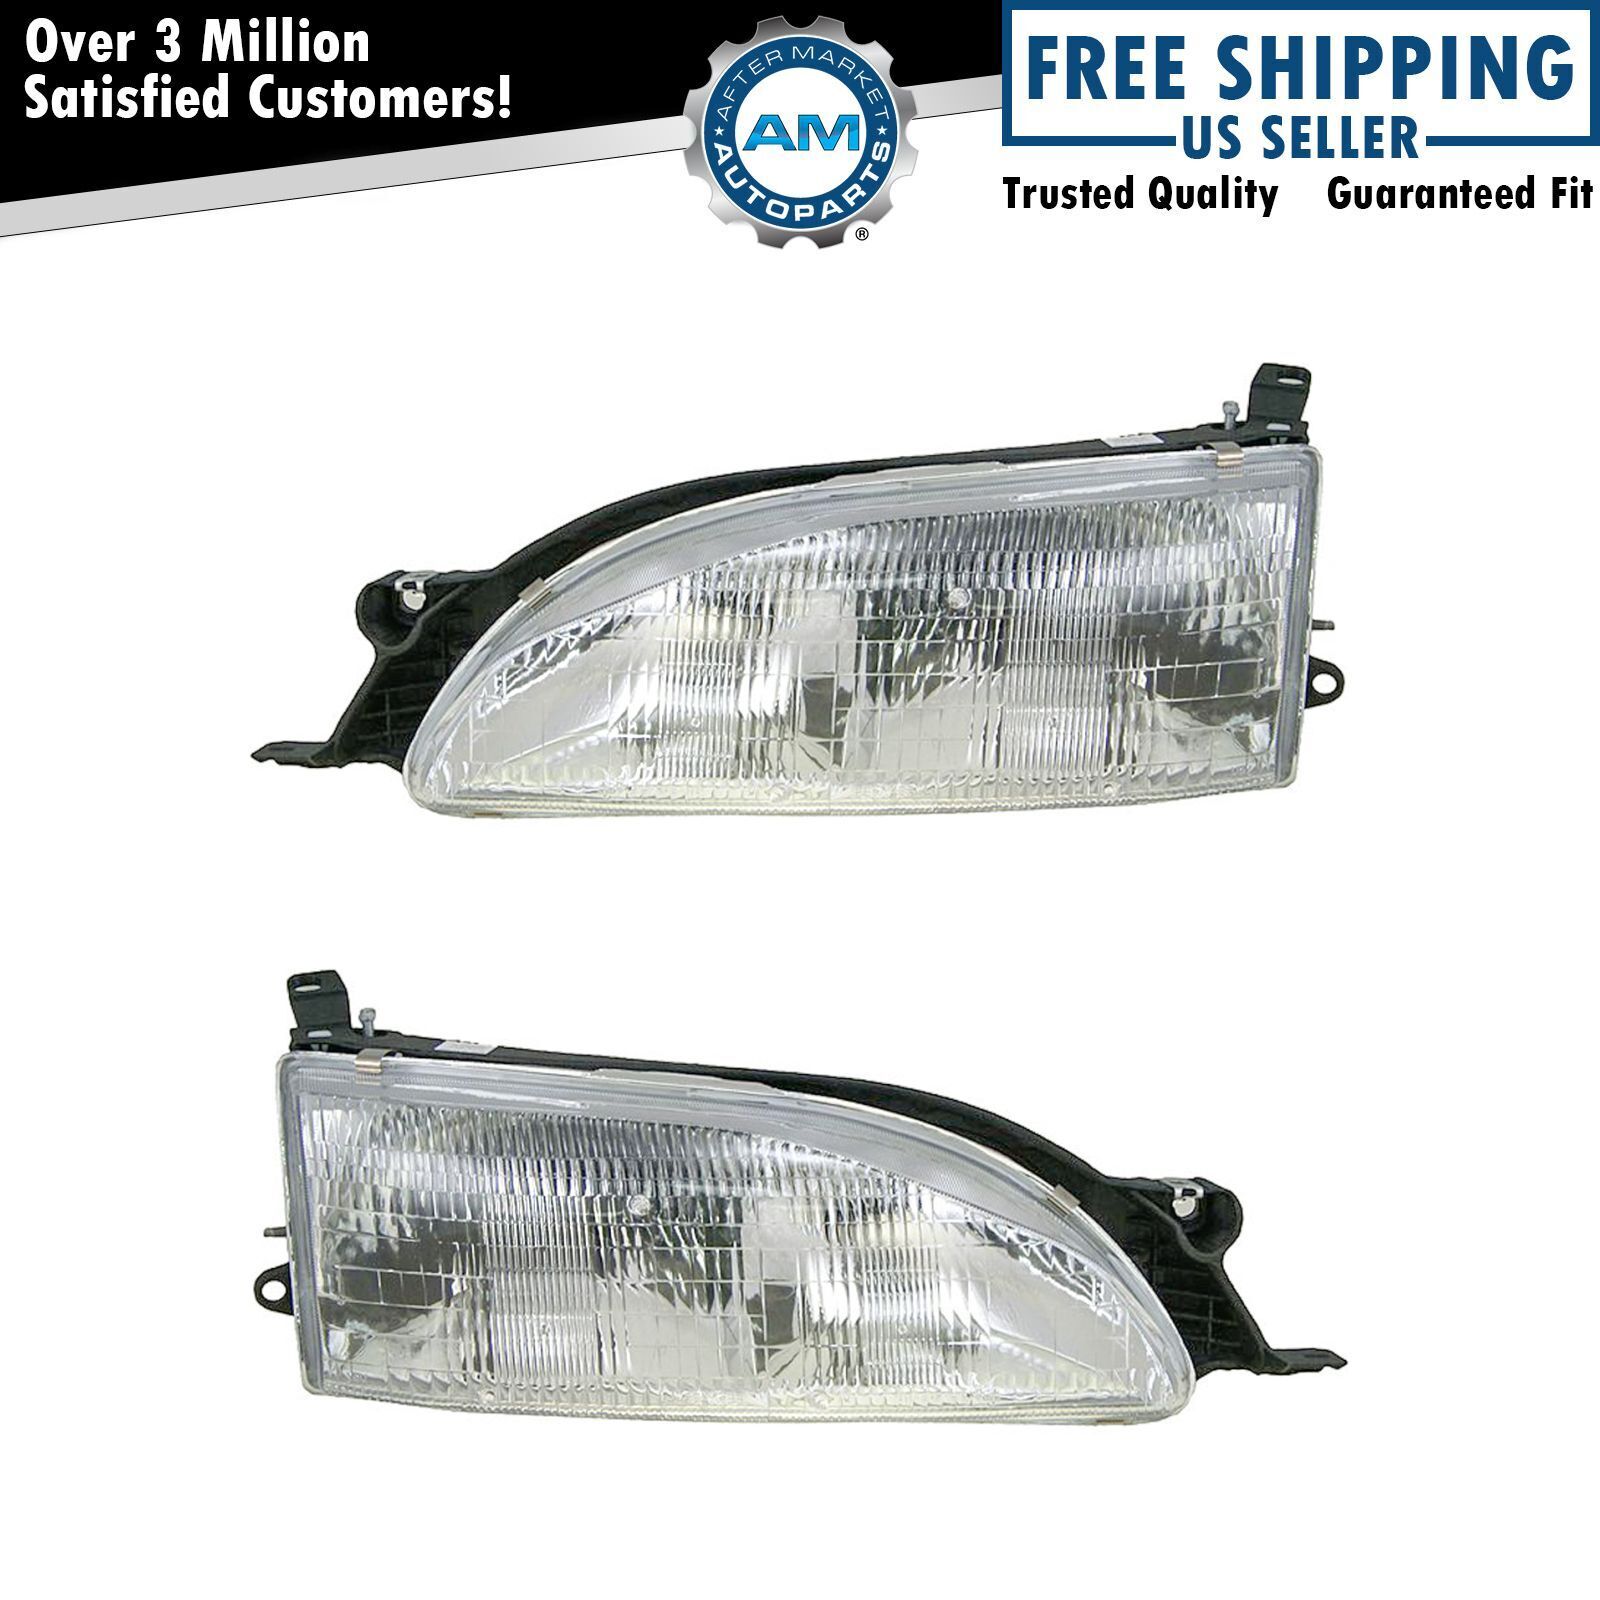 Headlights Headlamps Left & Right Pair Set NEW for 95-96 Toyota Camry